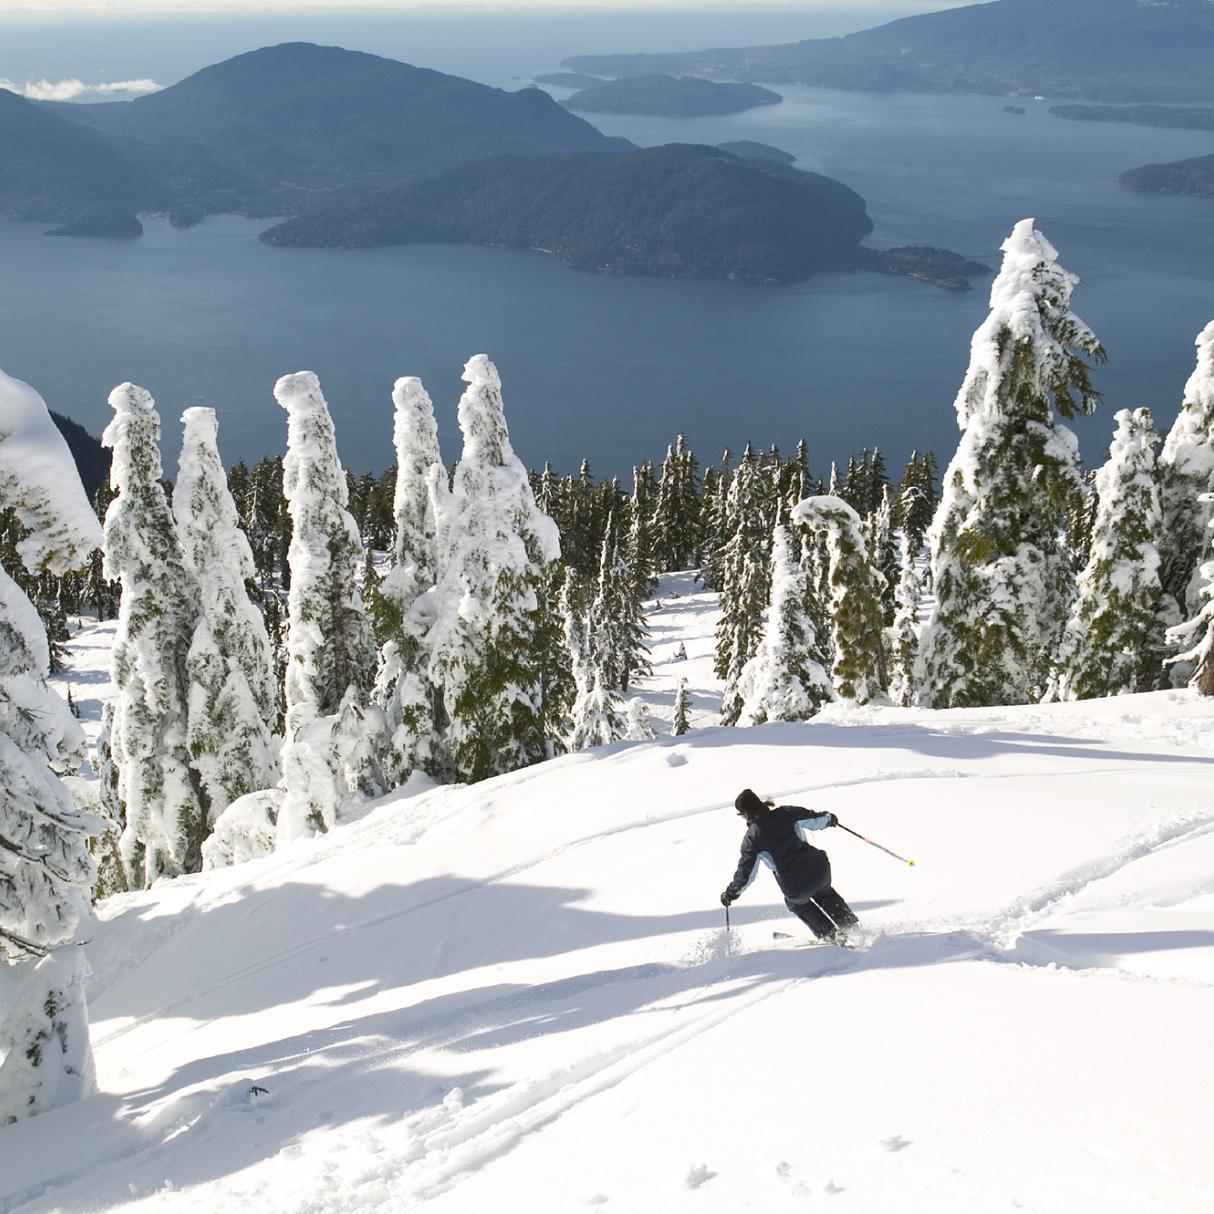 A skier descends a powdery white mountain lined with snow-topped trees